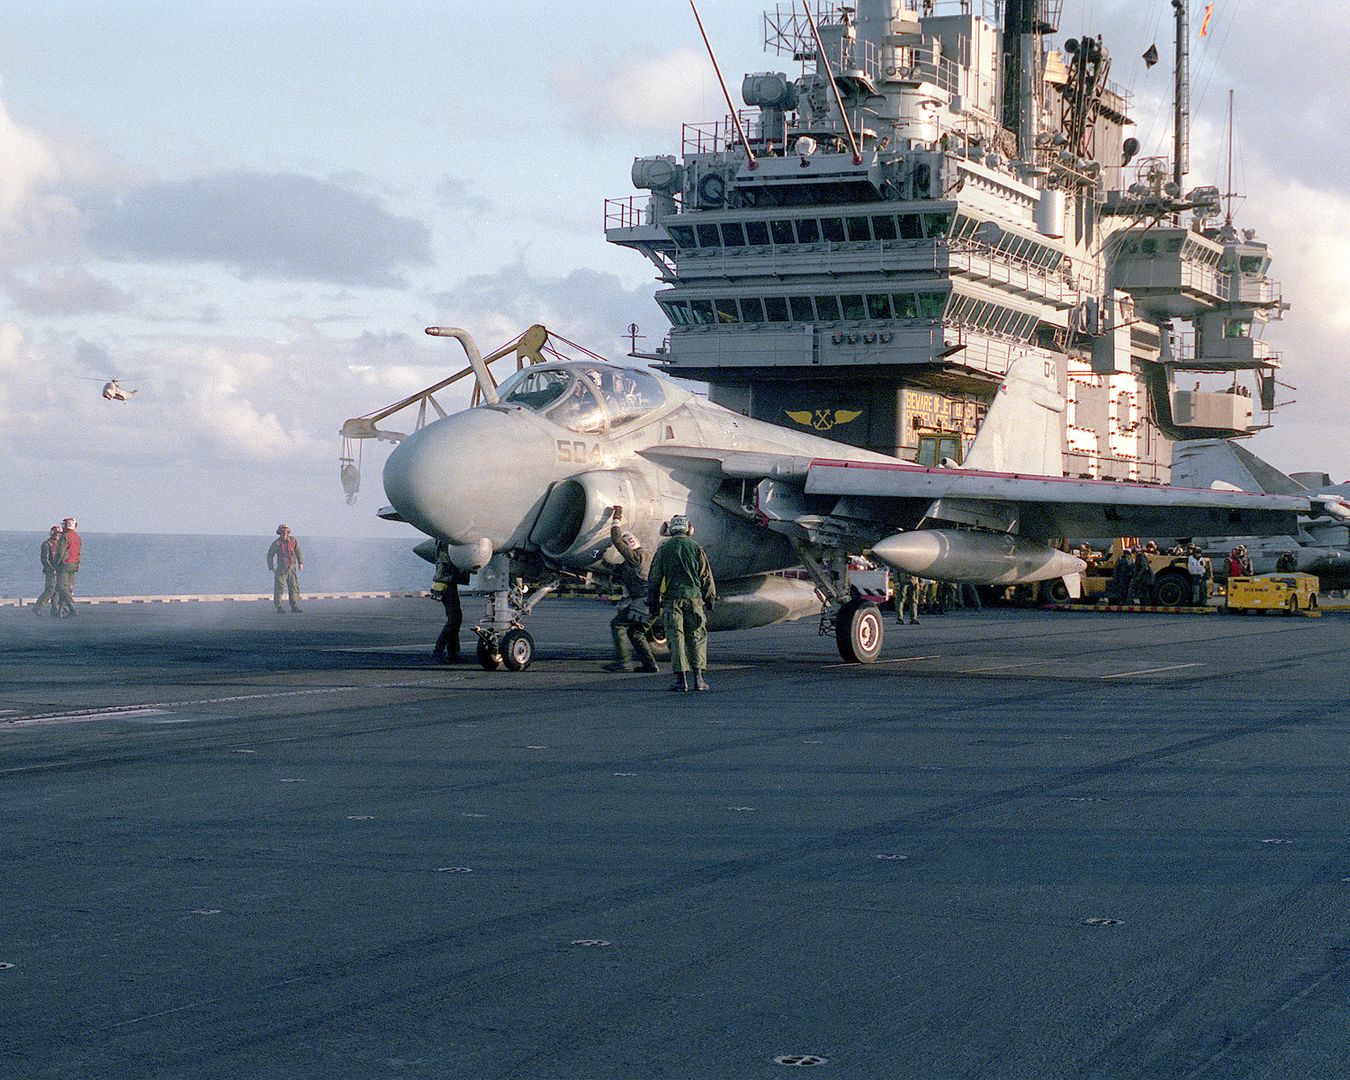 Attack Squadron 176 A 6E Intruder Aircraft On The Flight Deck Of The Aircraft Carrier USS FORRESTAL During The Allied Forces Exercise Team Work 88 1